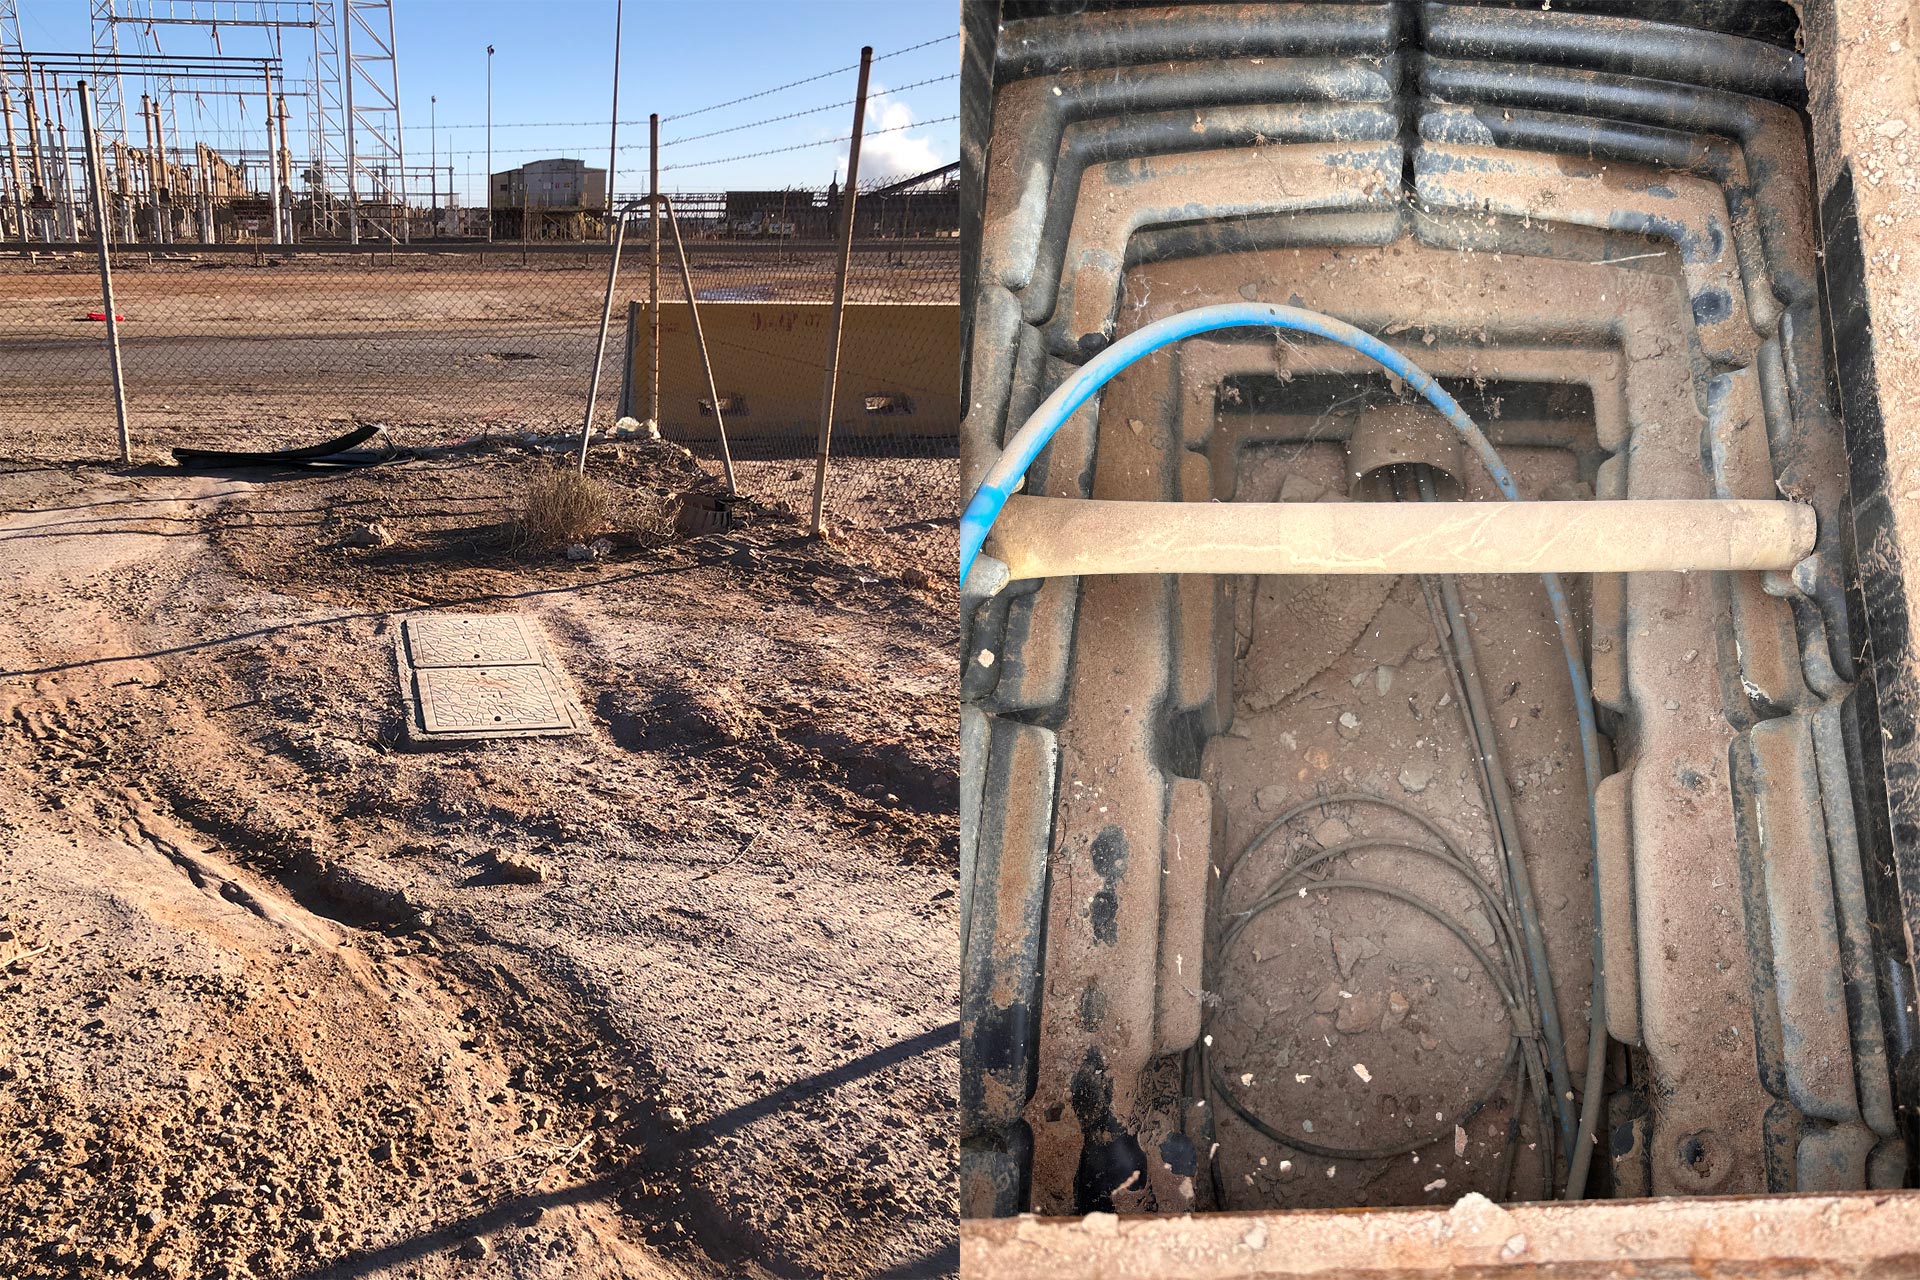 The slot trench investigation needed to locate pipes and conduits from multiple adjacent services.